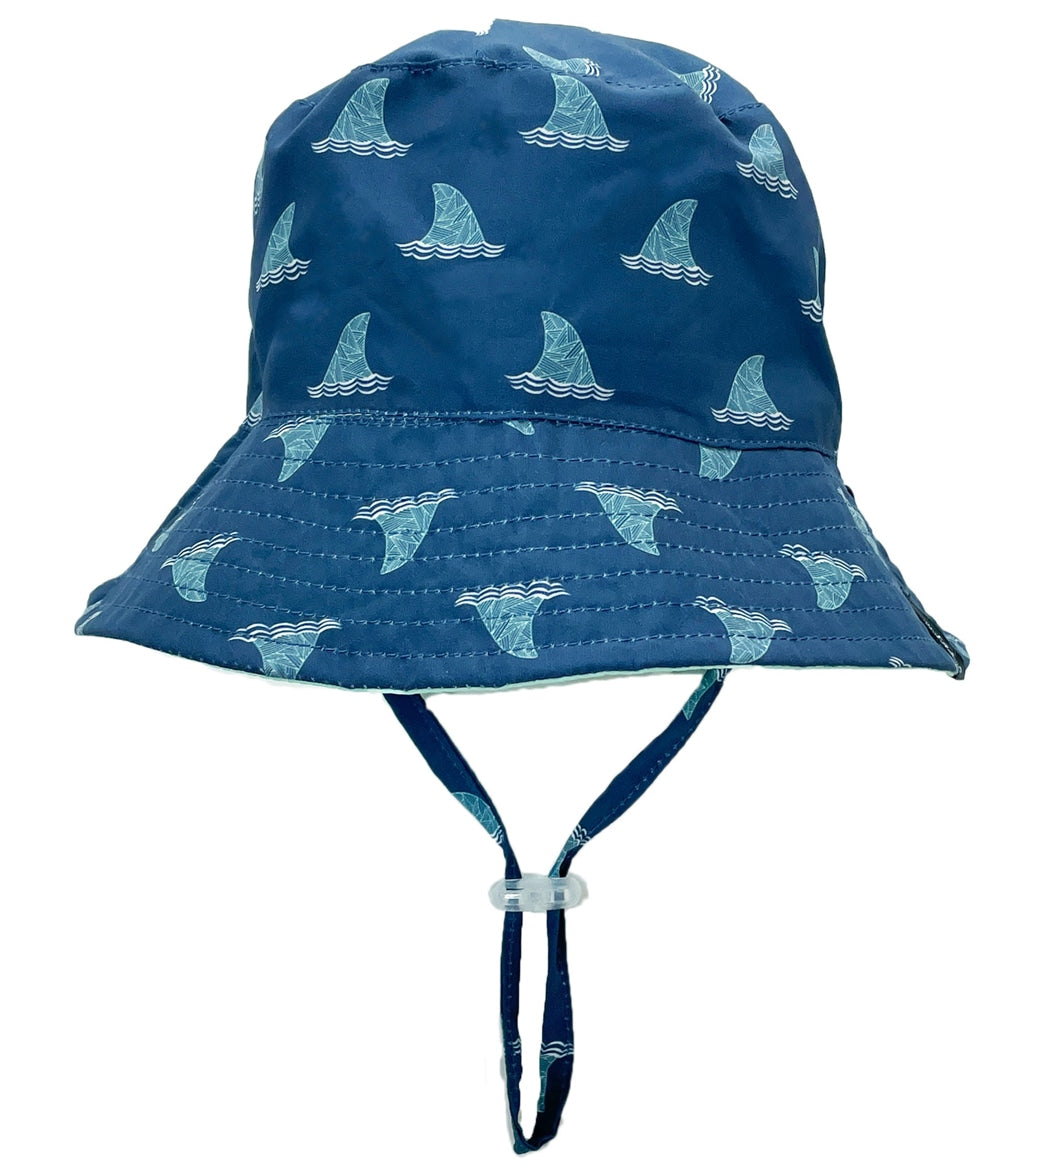 Feather 4 Arrow Boys Suns Out Reversible Bucket Hat (Baby, Toddler, Little Kid)